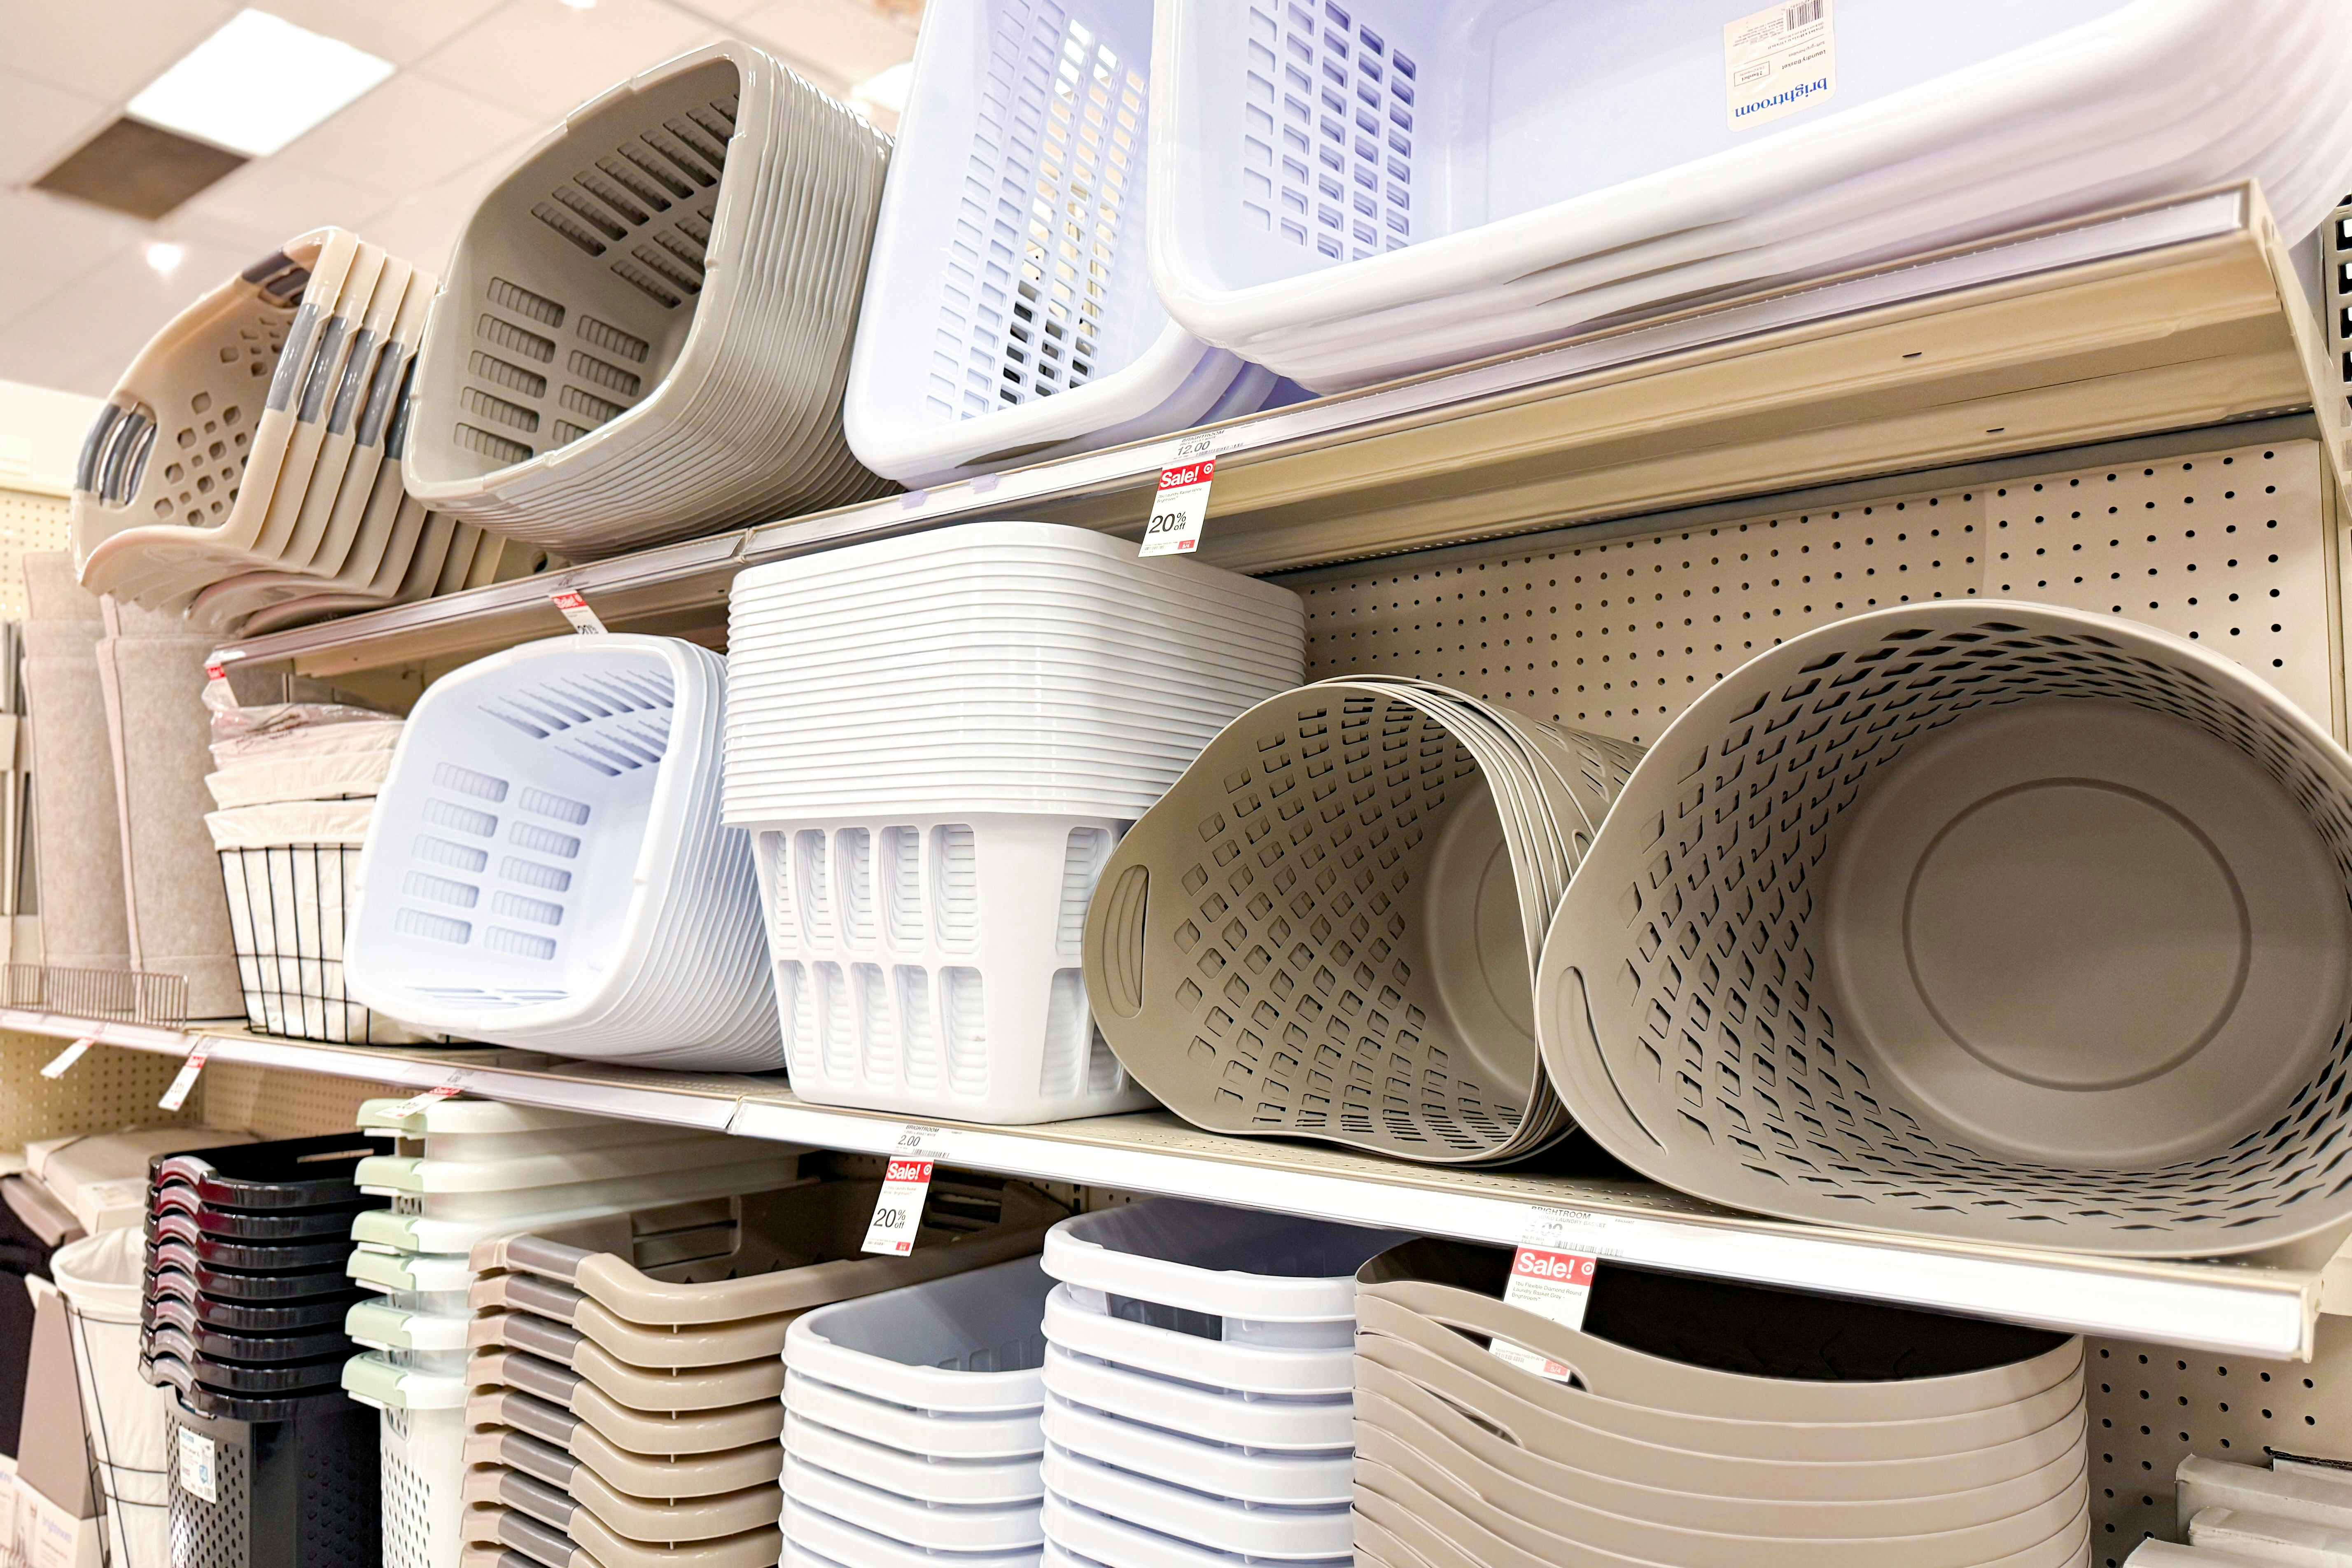 Laundry Room Target Organization Sale: $1.52 Baskets, $5 Hampers, and More